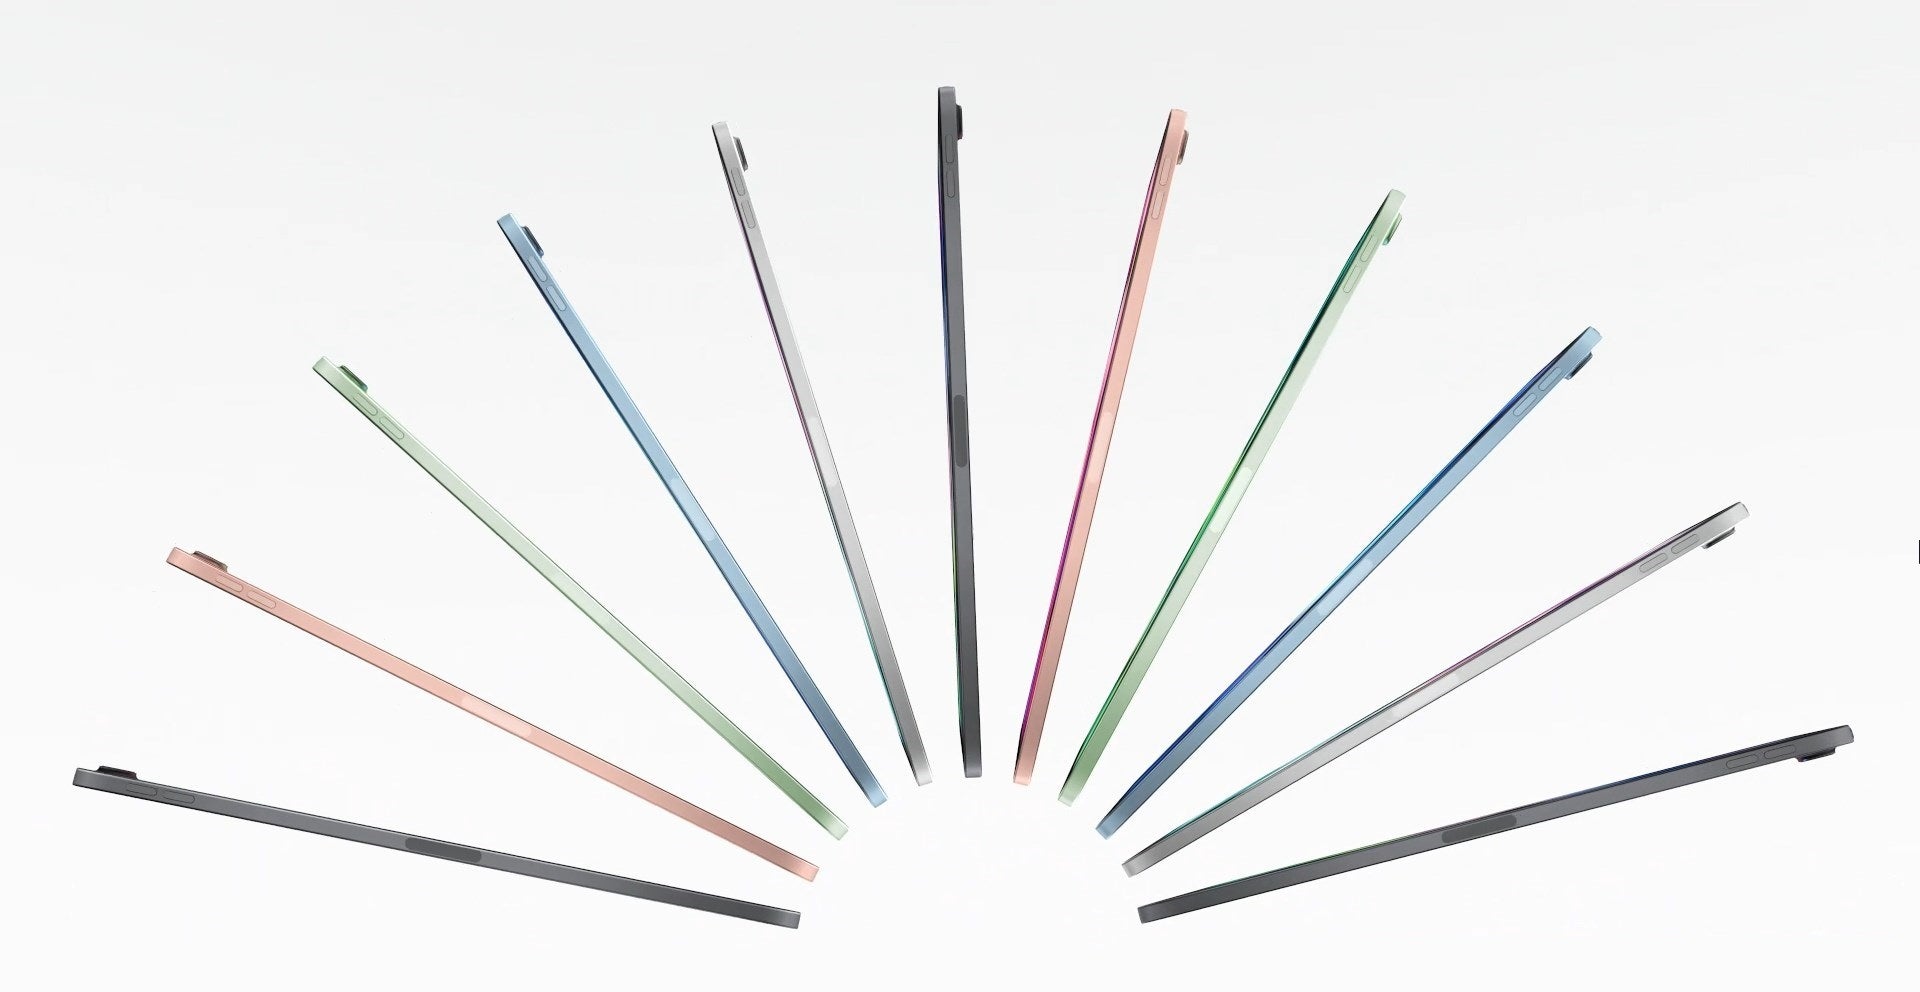 Not quite as colorful as the rainbow - Apple iPad Air 4: all the new colors